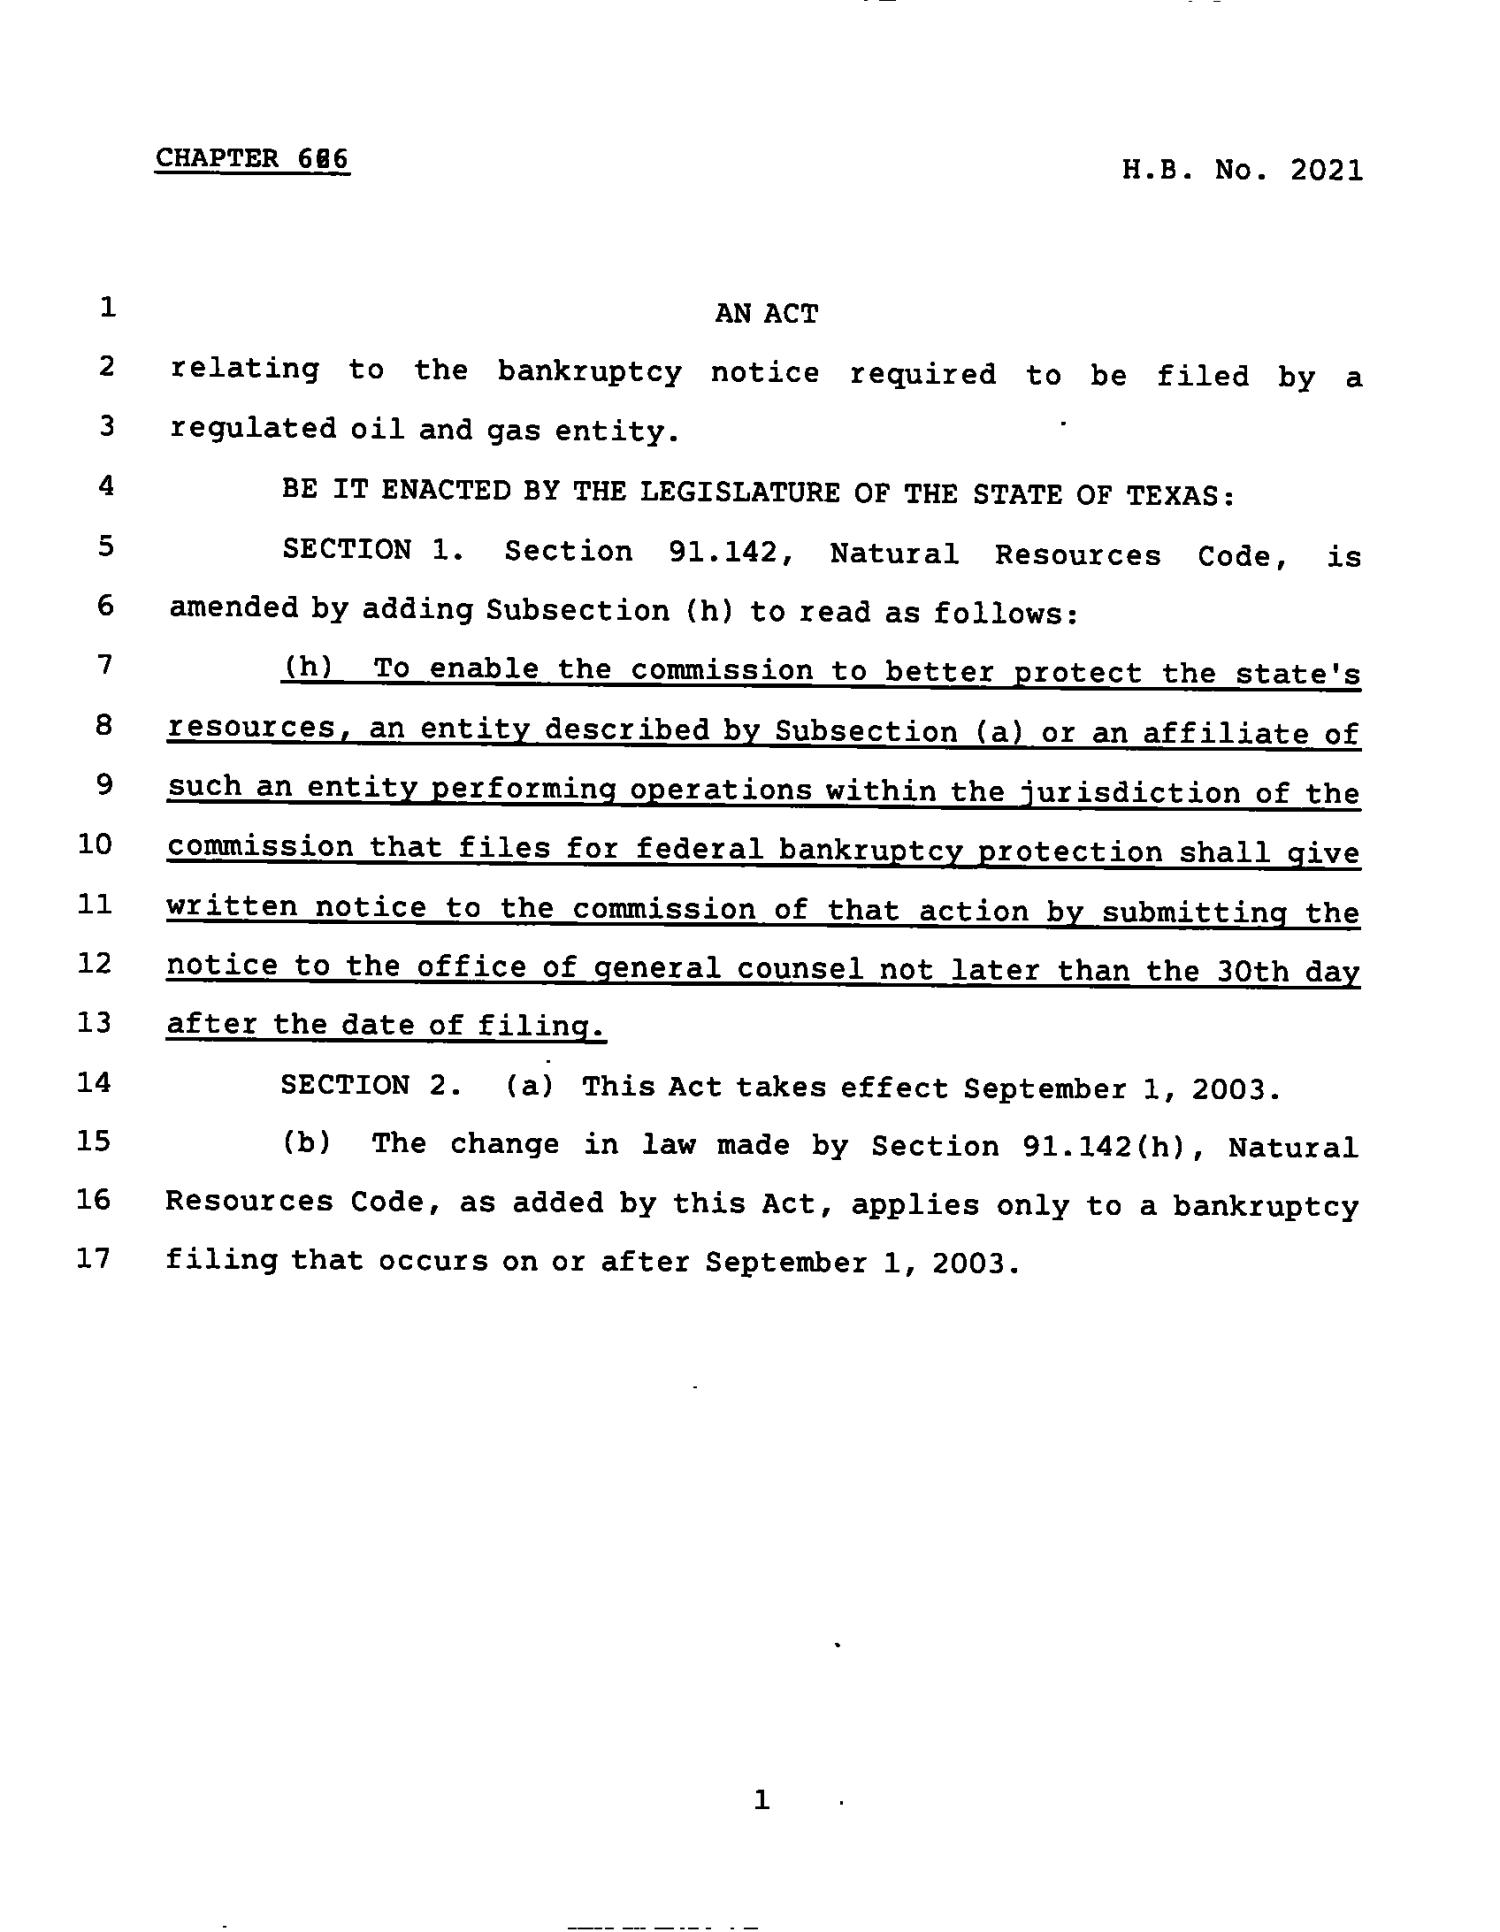 78th Texas Legislature, Regular Session, House Bill 2021, Chapter 626
                                                
                                                    [Sequence #]: 1 of 2
                                                